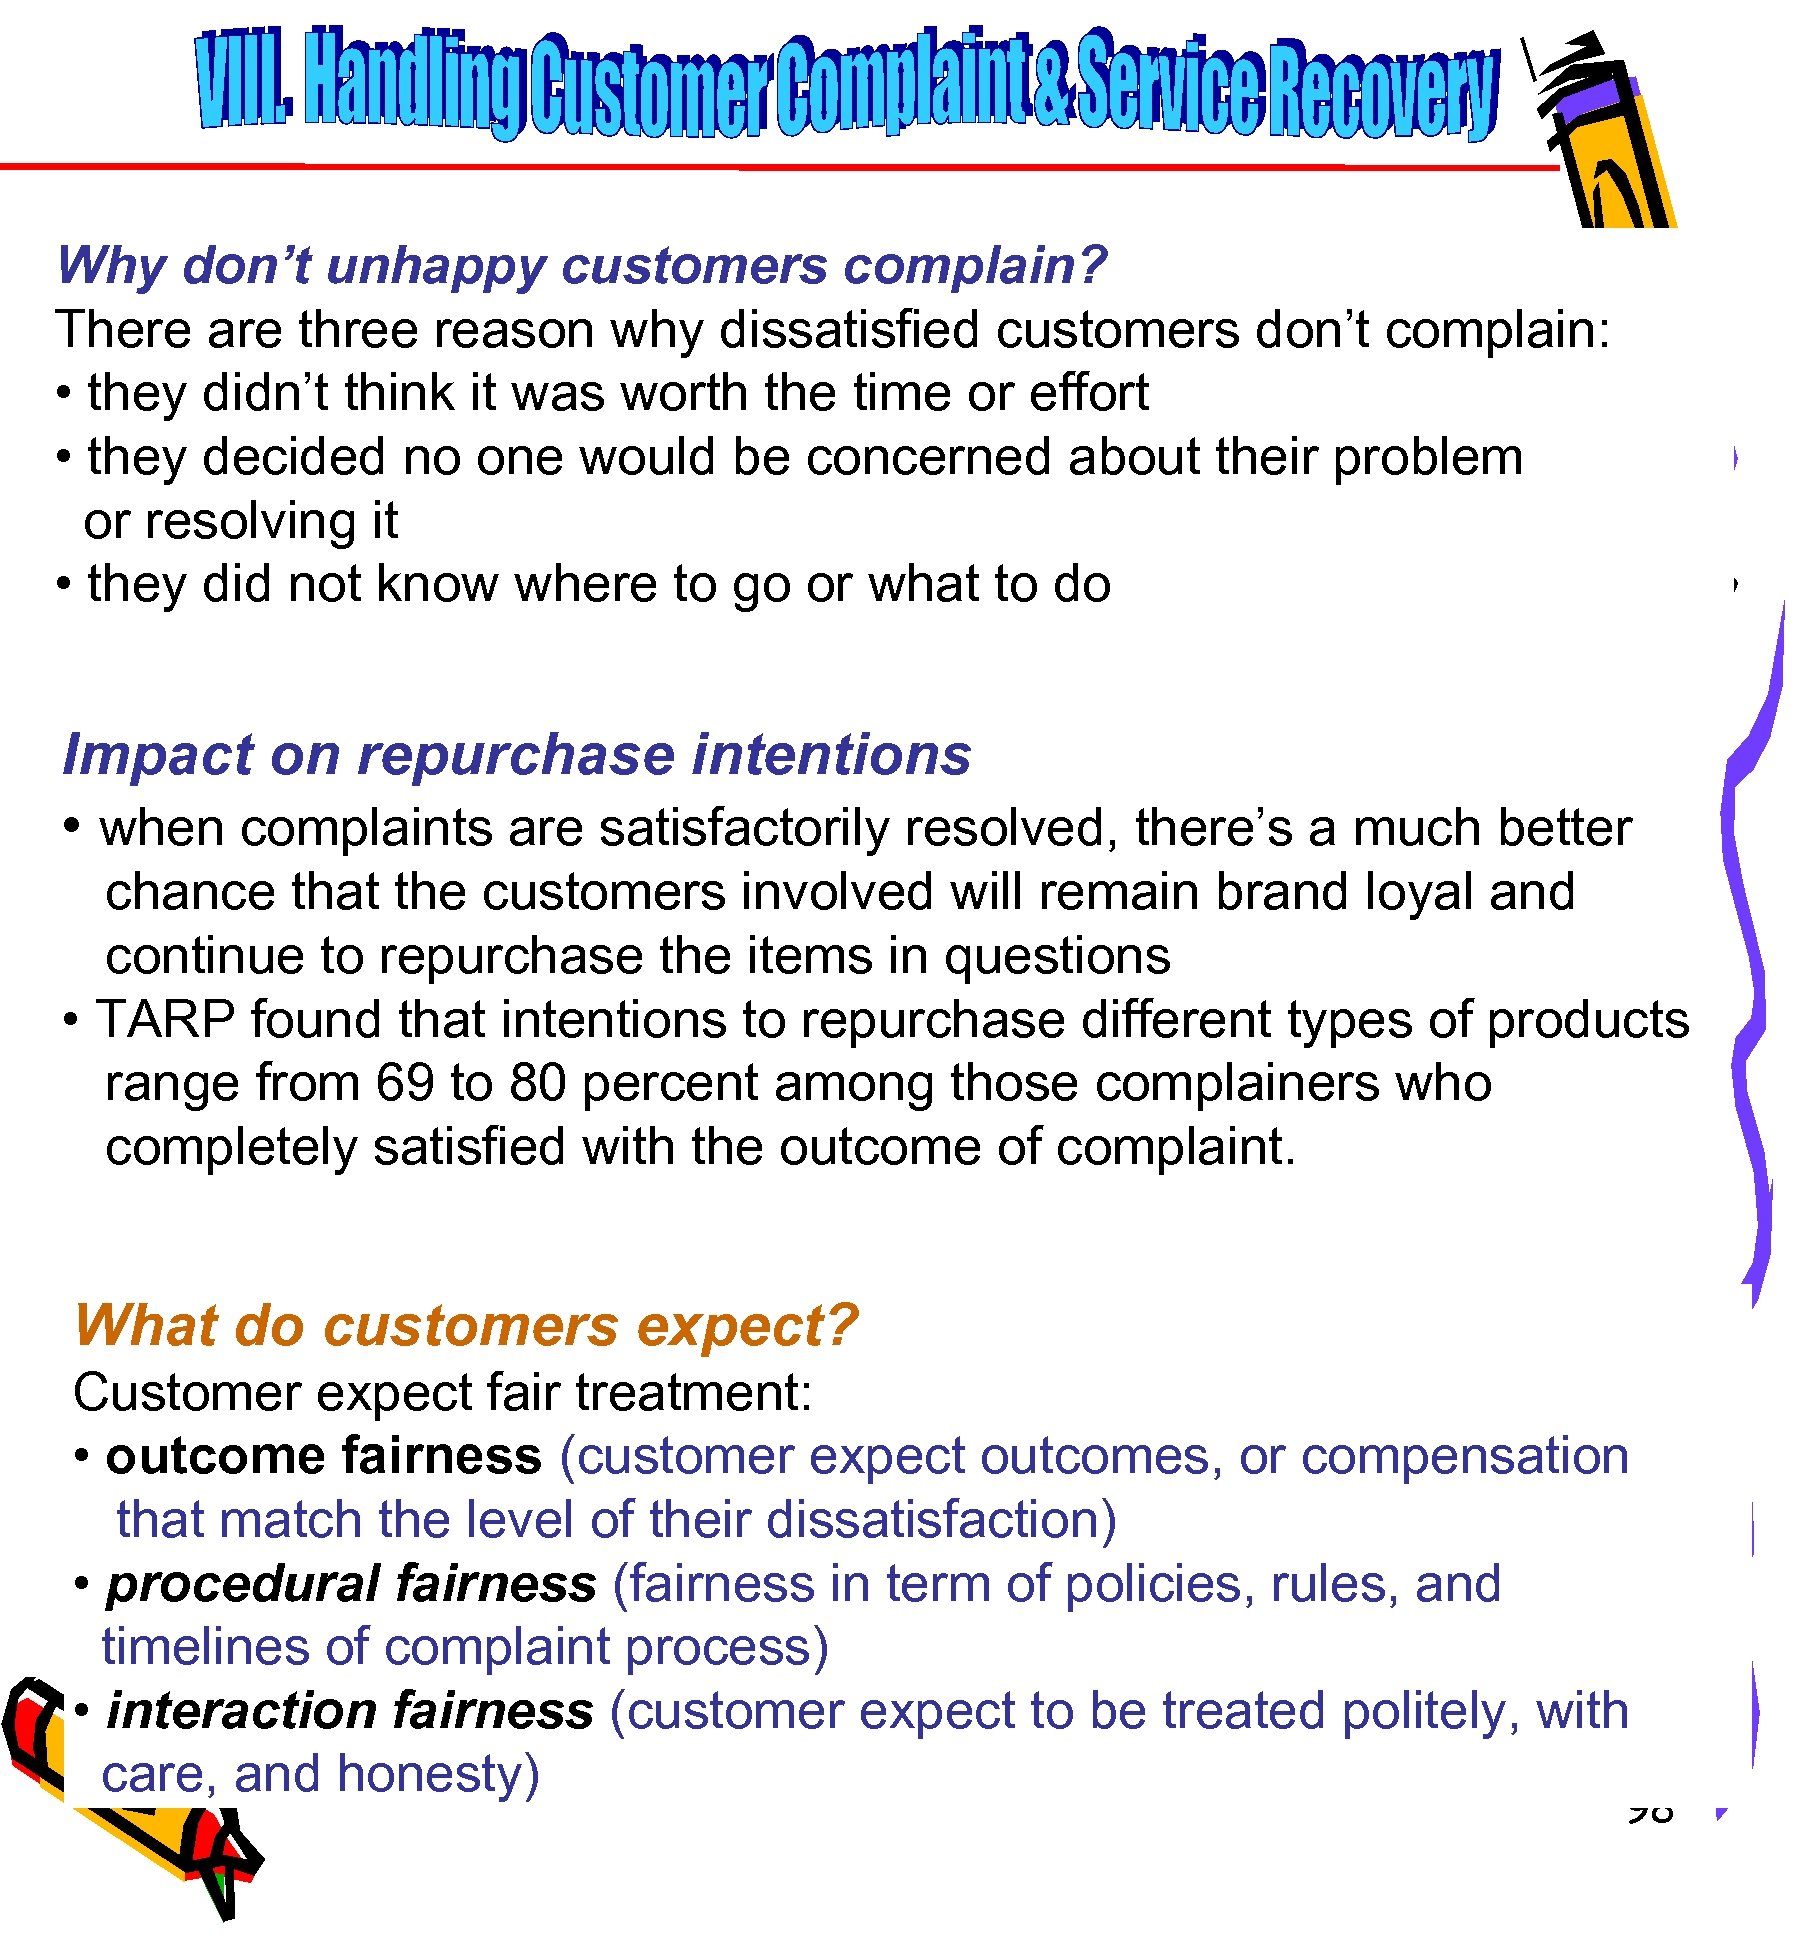 Why don’t unhappy customers complain? There are three reason why dissatisfied customers don’t complain: